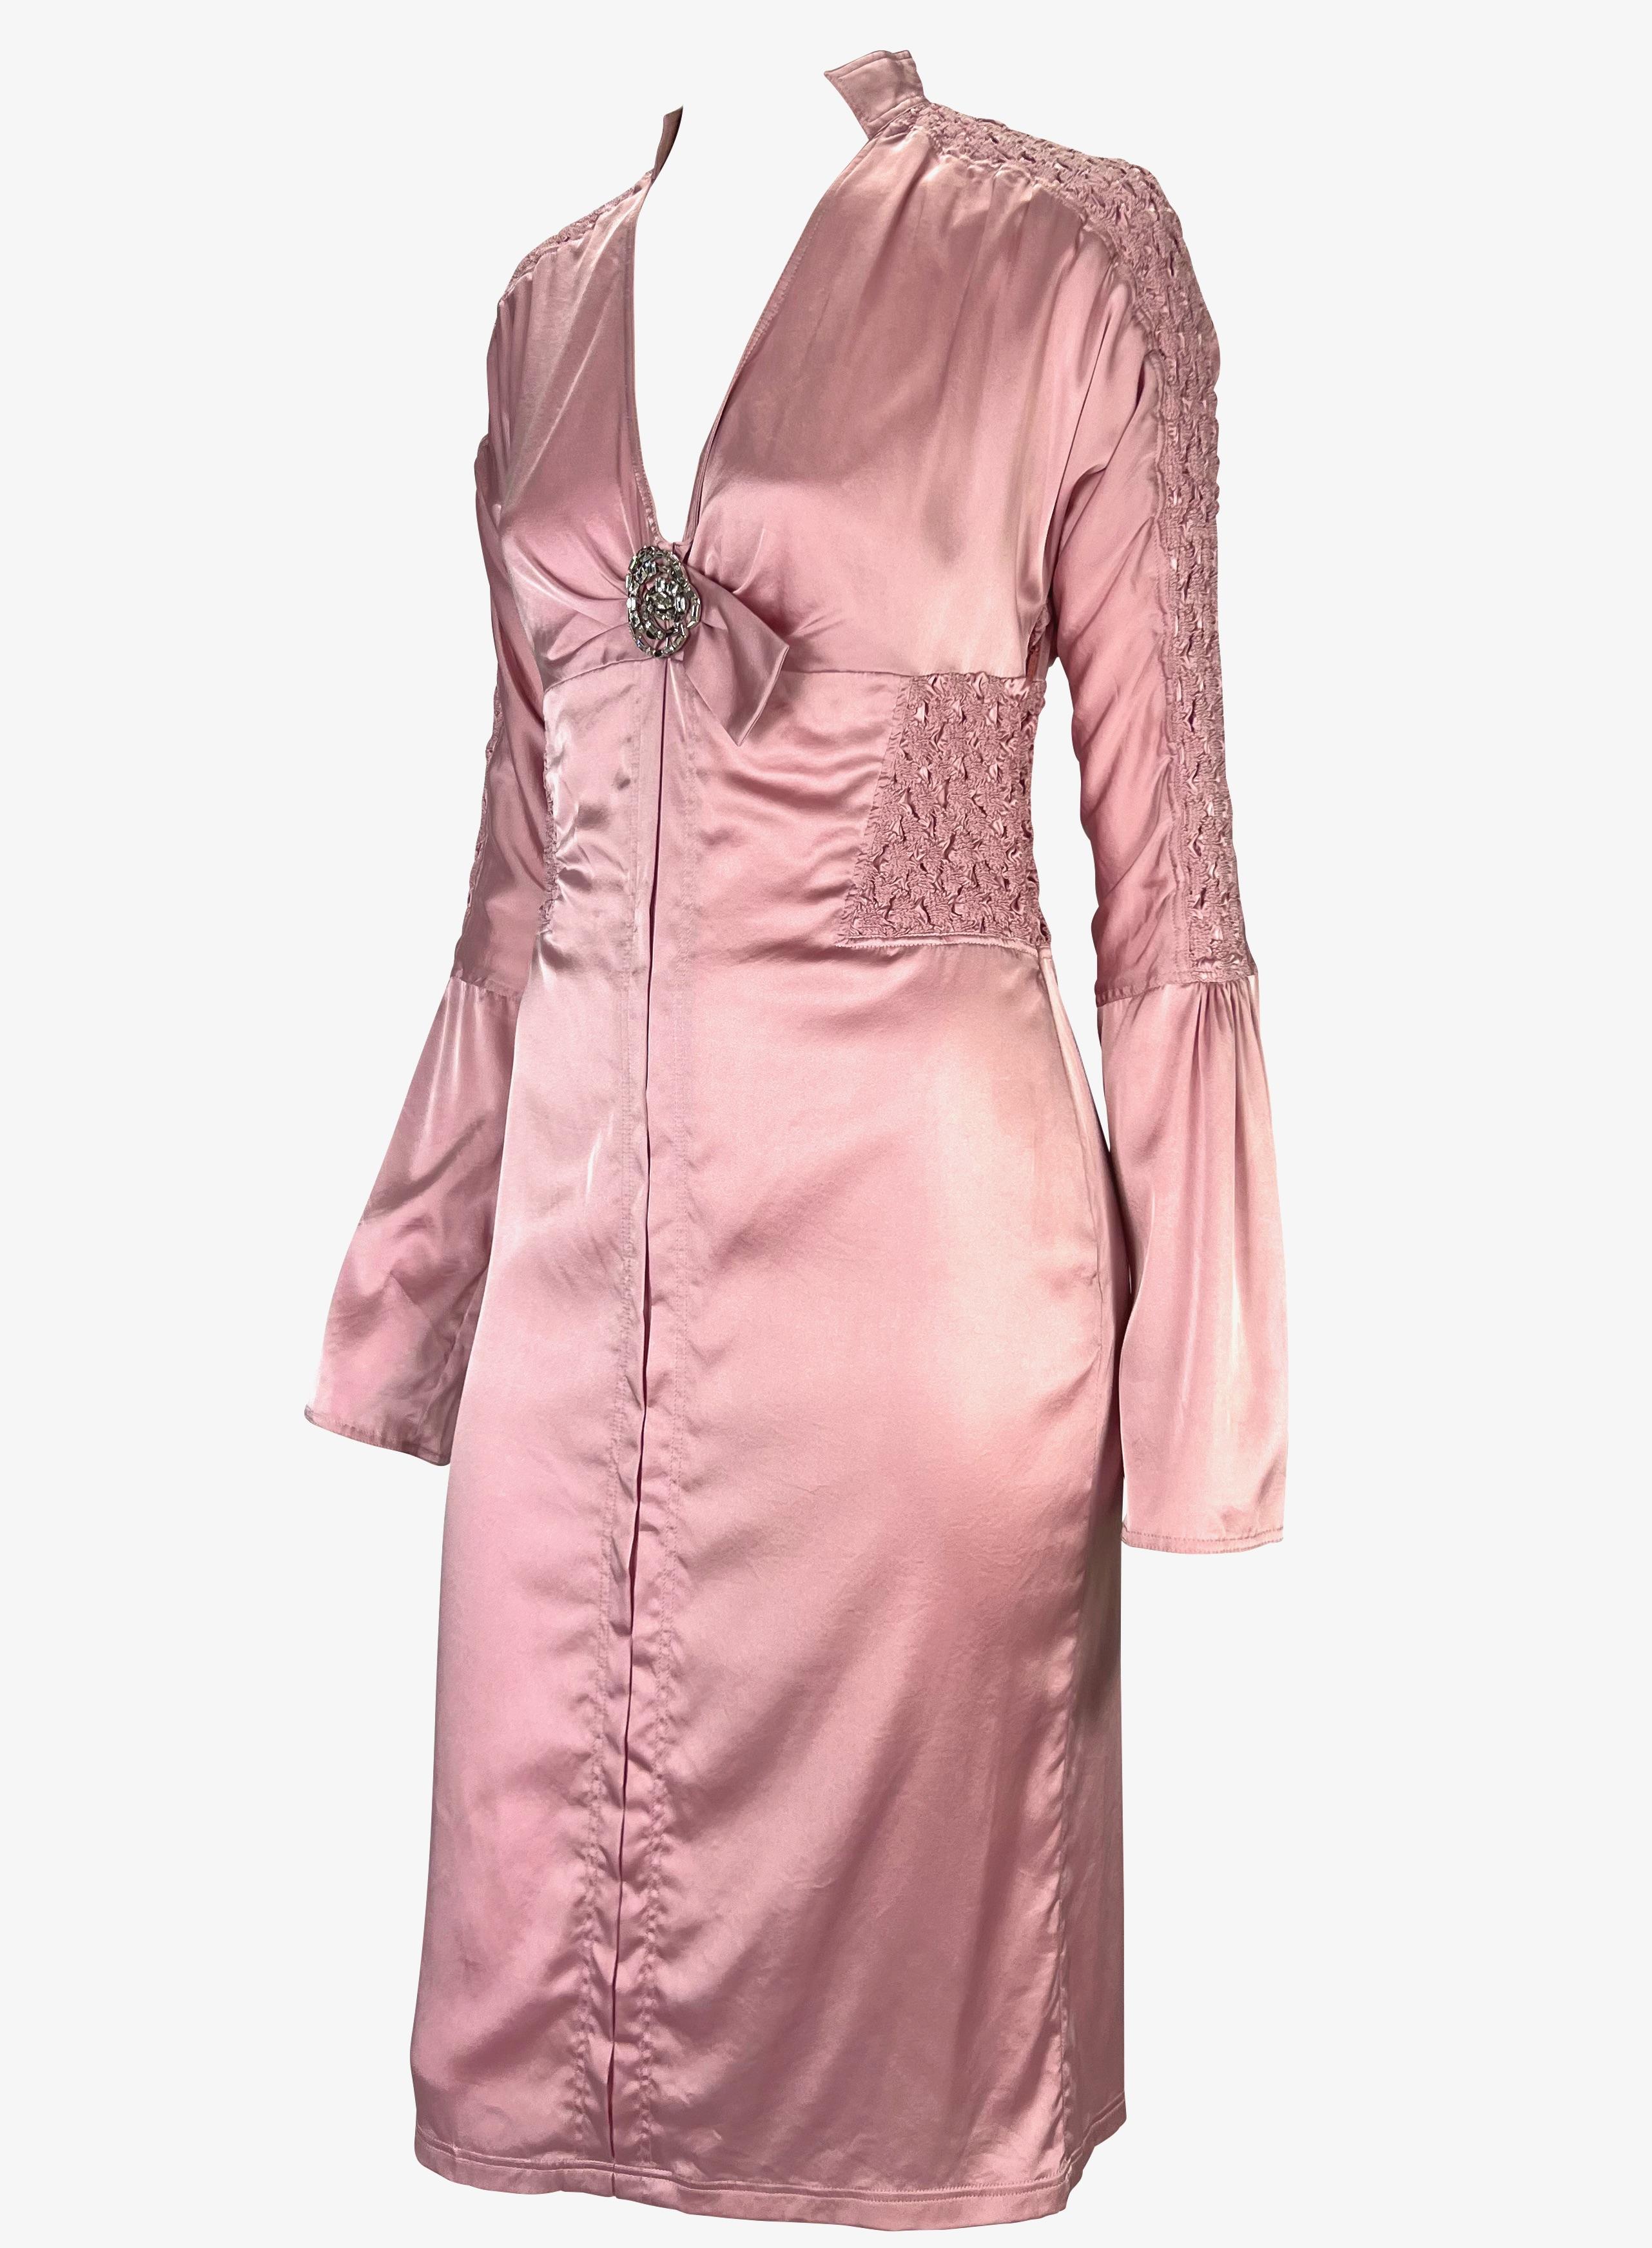 Presenting a beautiful metallic pink silk ruched Gucci dress, designed by Tom Ford. From the Spring/Summer 2004 collection, this form-fitting dress features a v-neckline, stand-up collar, long bell-style sleeves, and an exposed back. Ruched fabric